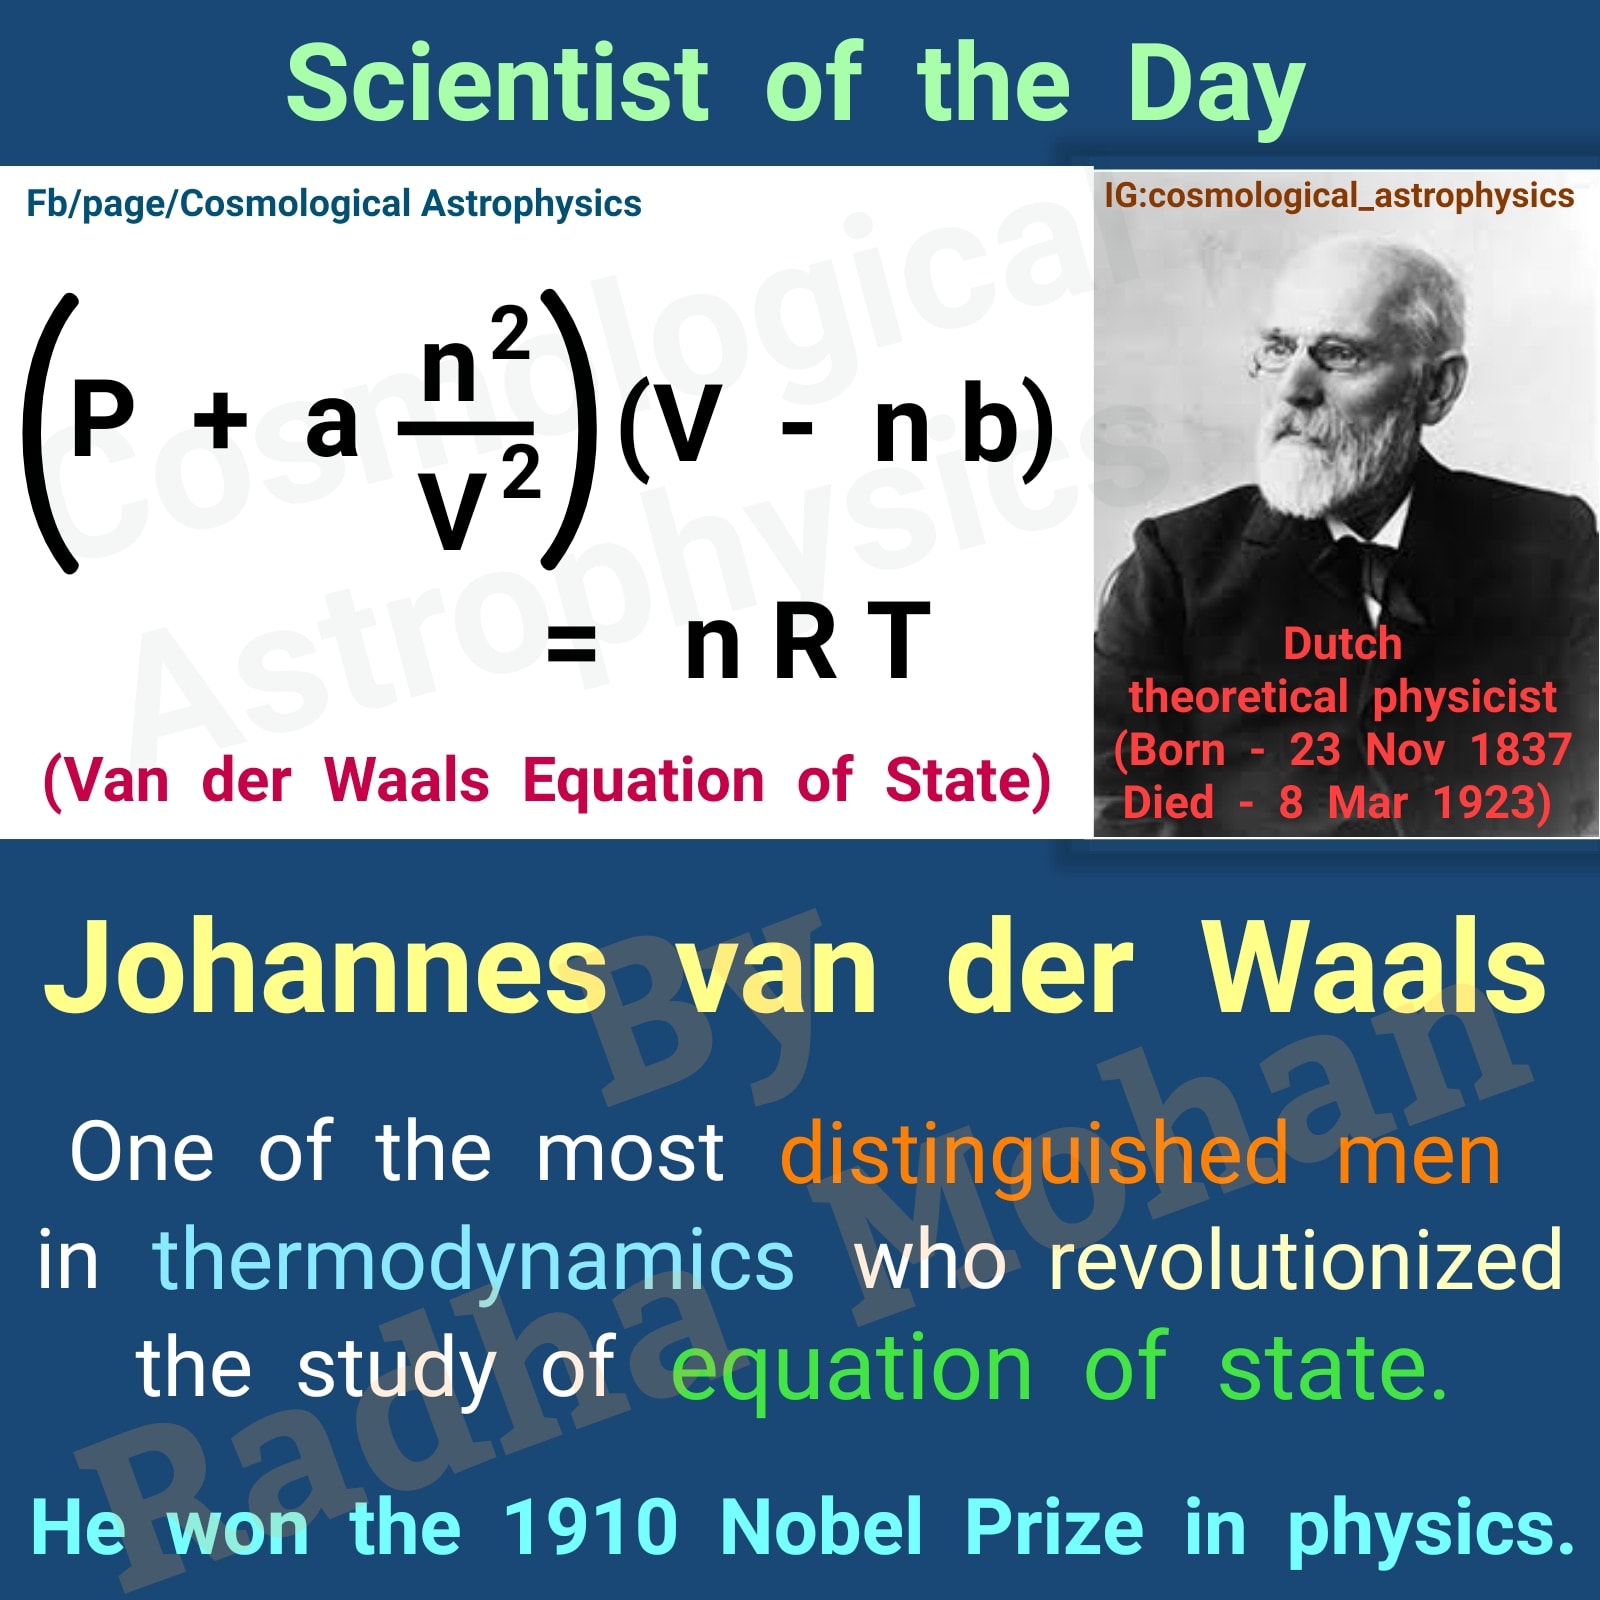 Today we talk about such a man who was largely self-taught in science and he started his career as a school teacher and later became the first person to obtain an equation of state that describes the condition of both gases and liquids in terms of their #